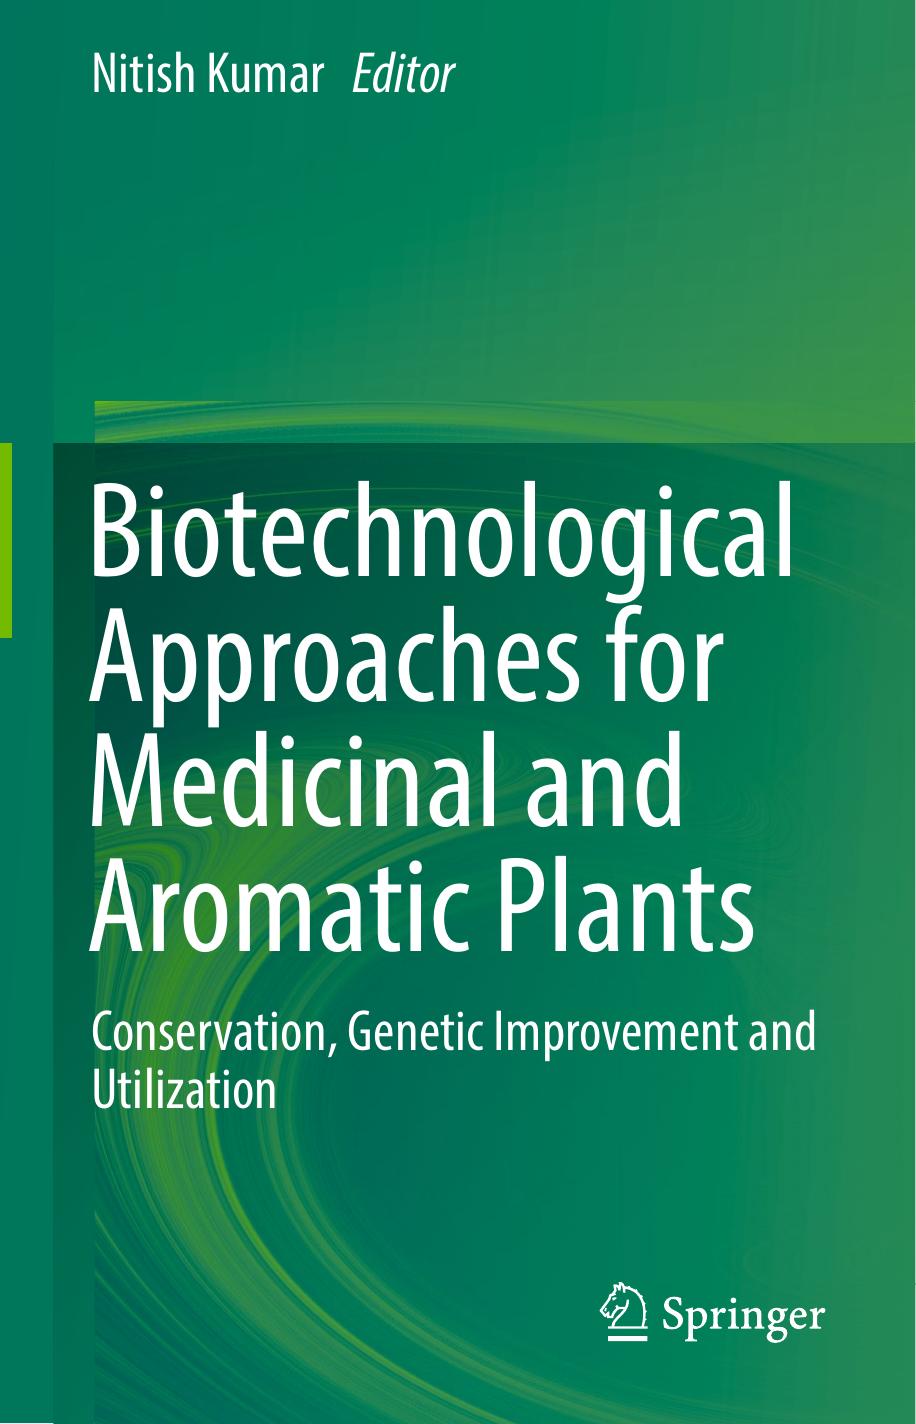 Biotechnological Approaches for Medicinal and Aromatic Plants Conservation, Genetic Improvement and Utilization 2018